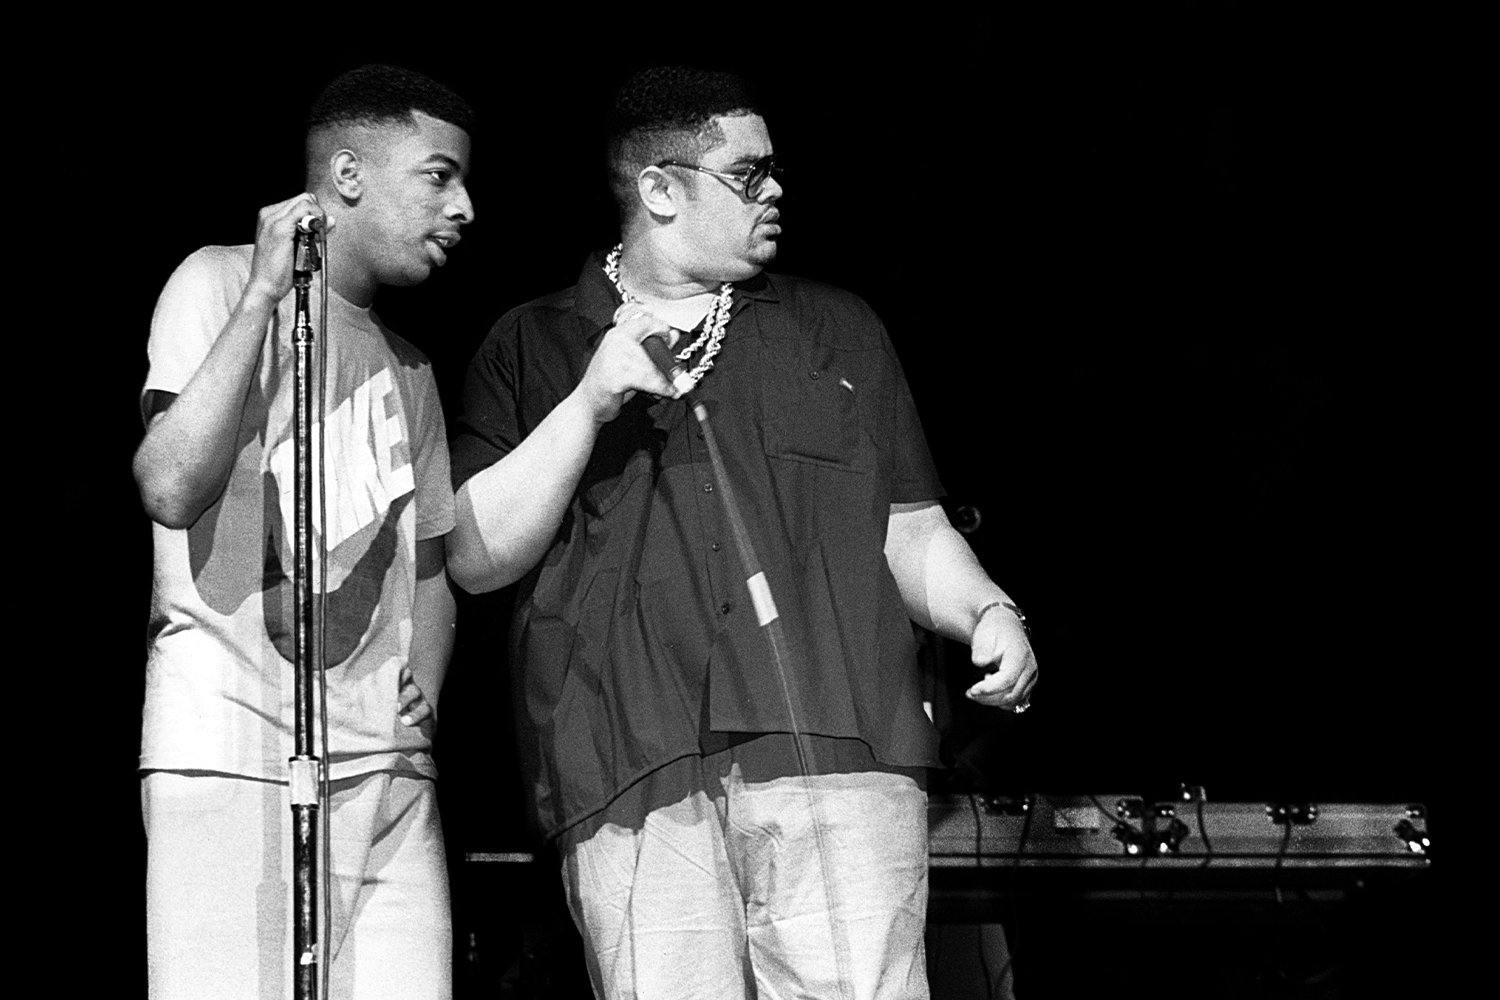 Trouble T-Roy of Heavy D. And The Boyz and Heavy D. performs at the Holiday Star Theater in Merrillville, Indiana in 1988.